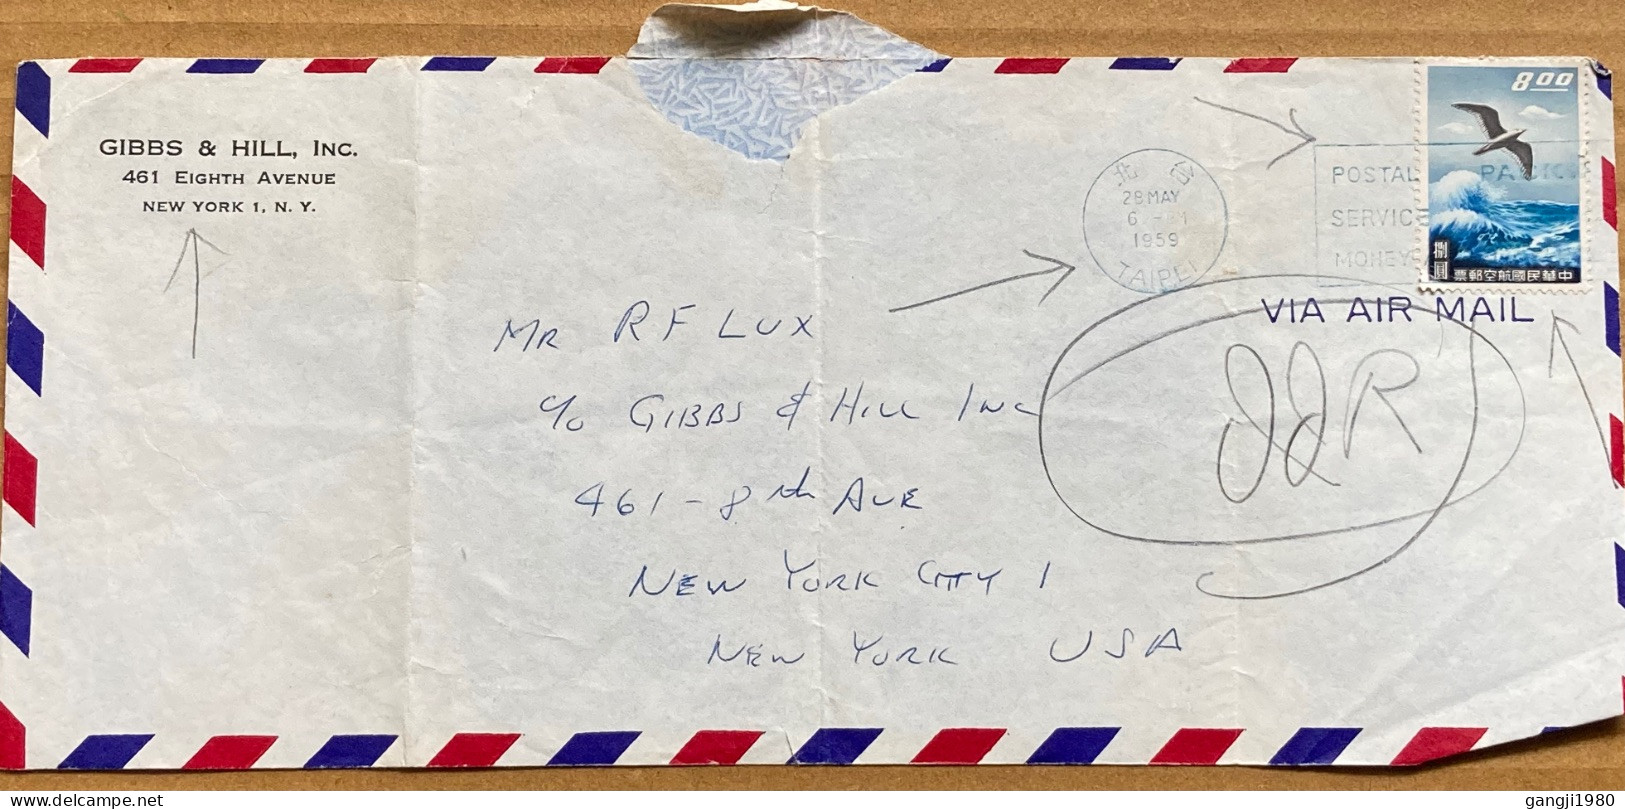 CHINA TAIWAN 1959, COVER USED TO USA, EARLY METER MACHINE, BLUE SLOGAN, POSTAL SERVICE MONEY, SEAGULL BIRD, GIBB'S & HIL - Briefe U. Dokumente